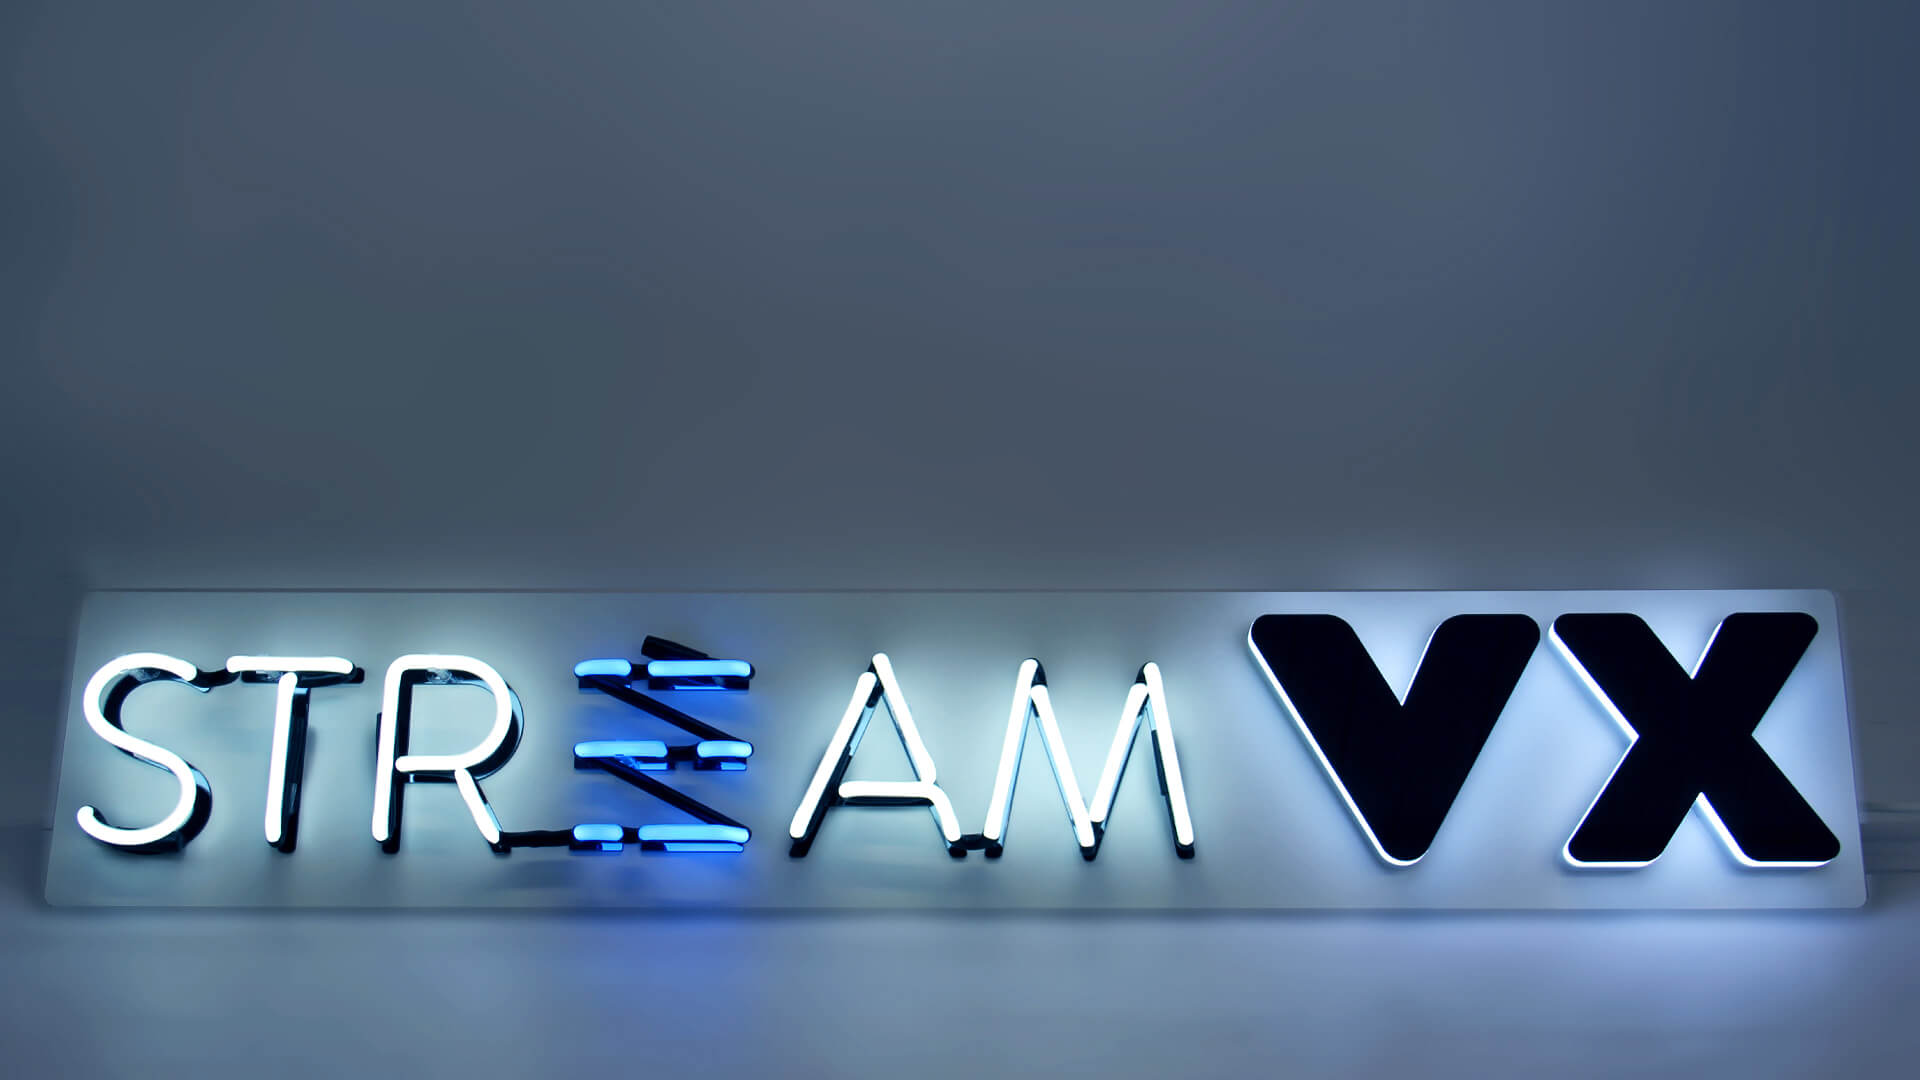 STREAM - lettering made of neon with addition of LED illuminated letters